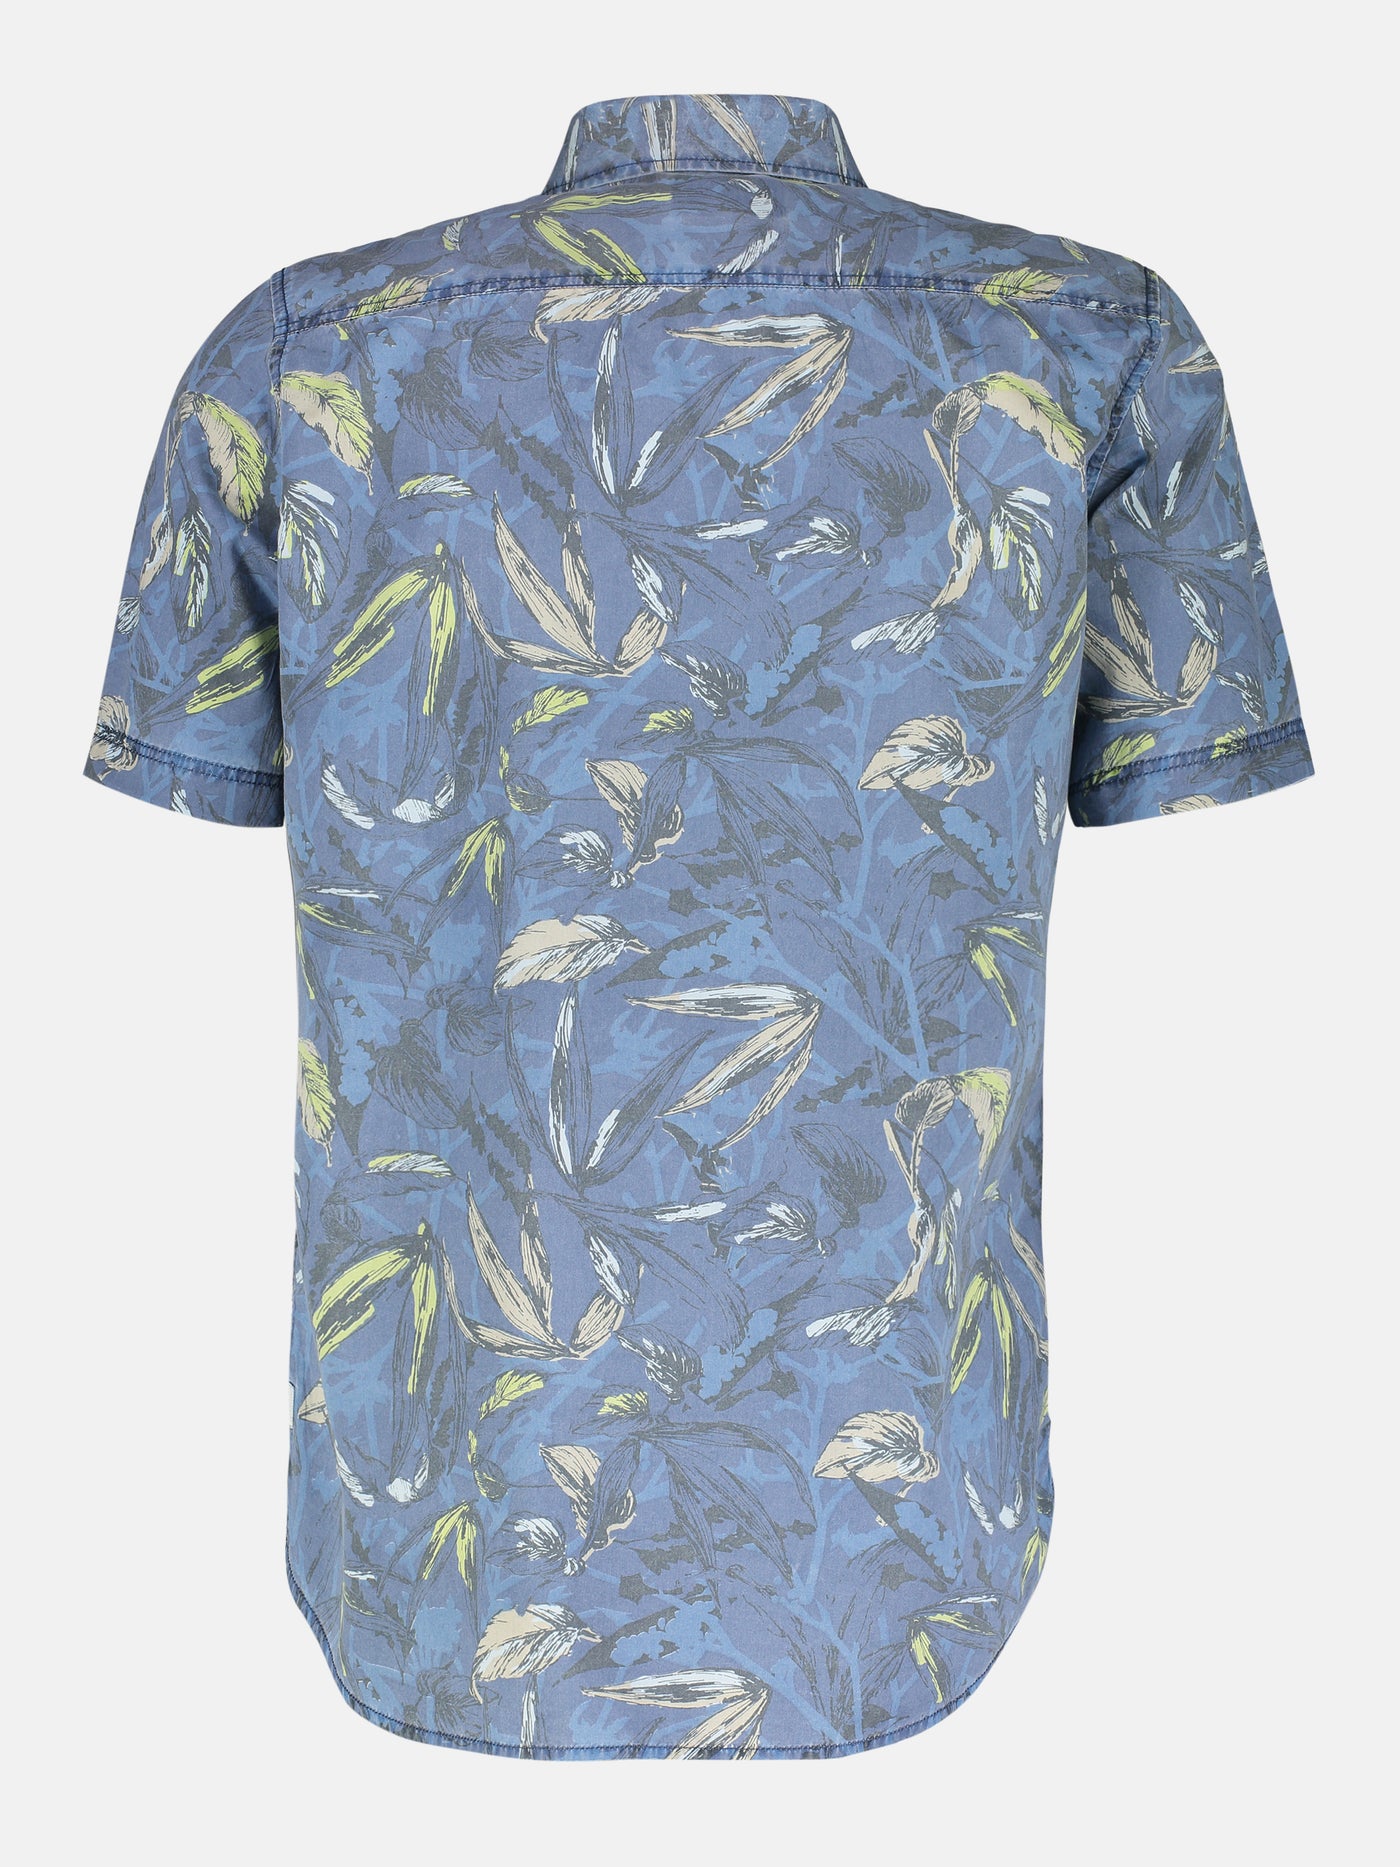 Short-sleeved shirt with floral all-over print